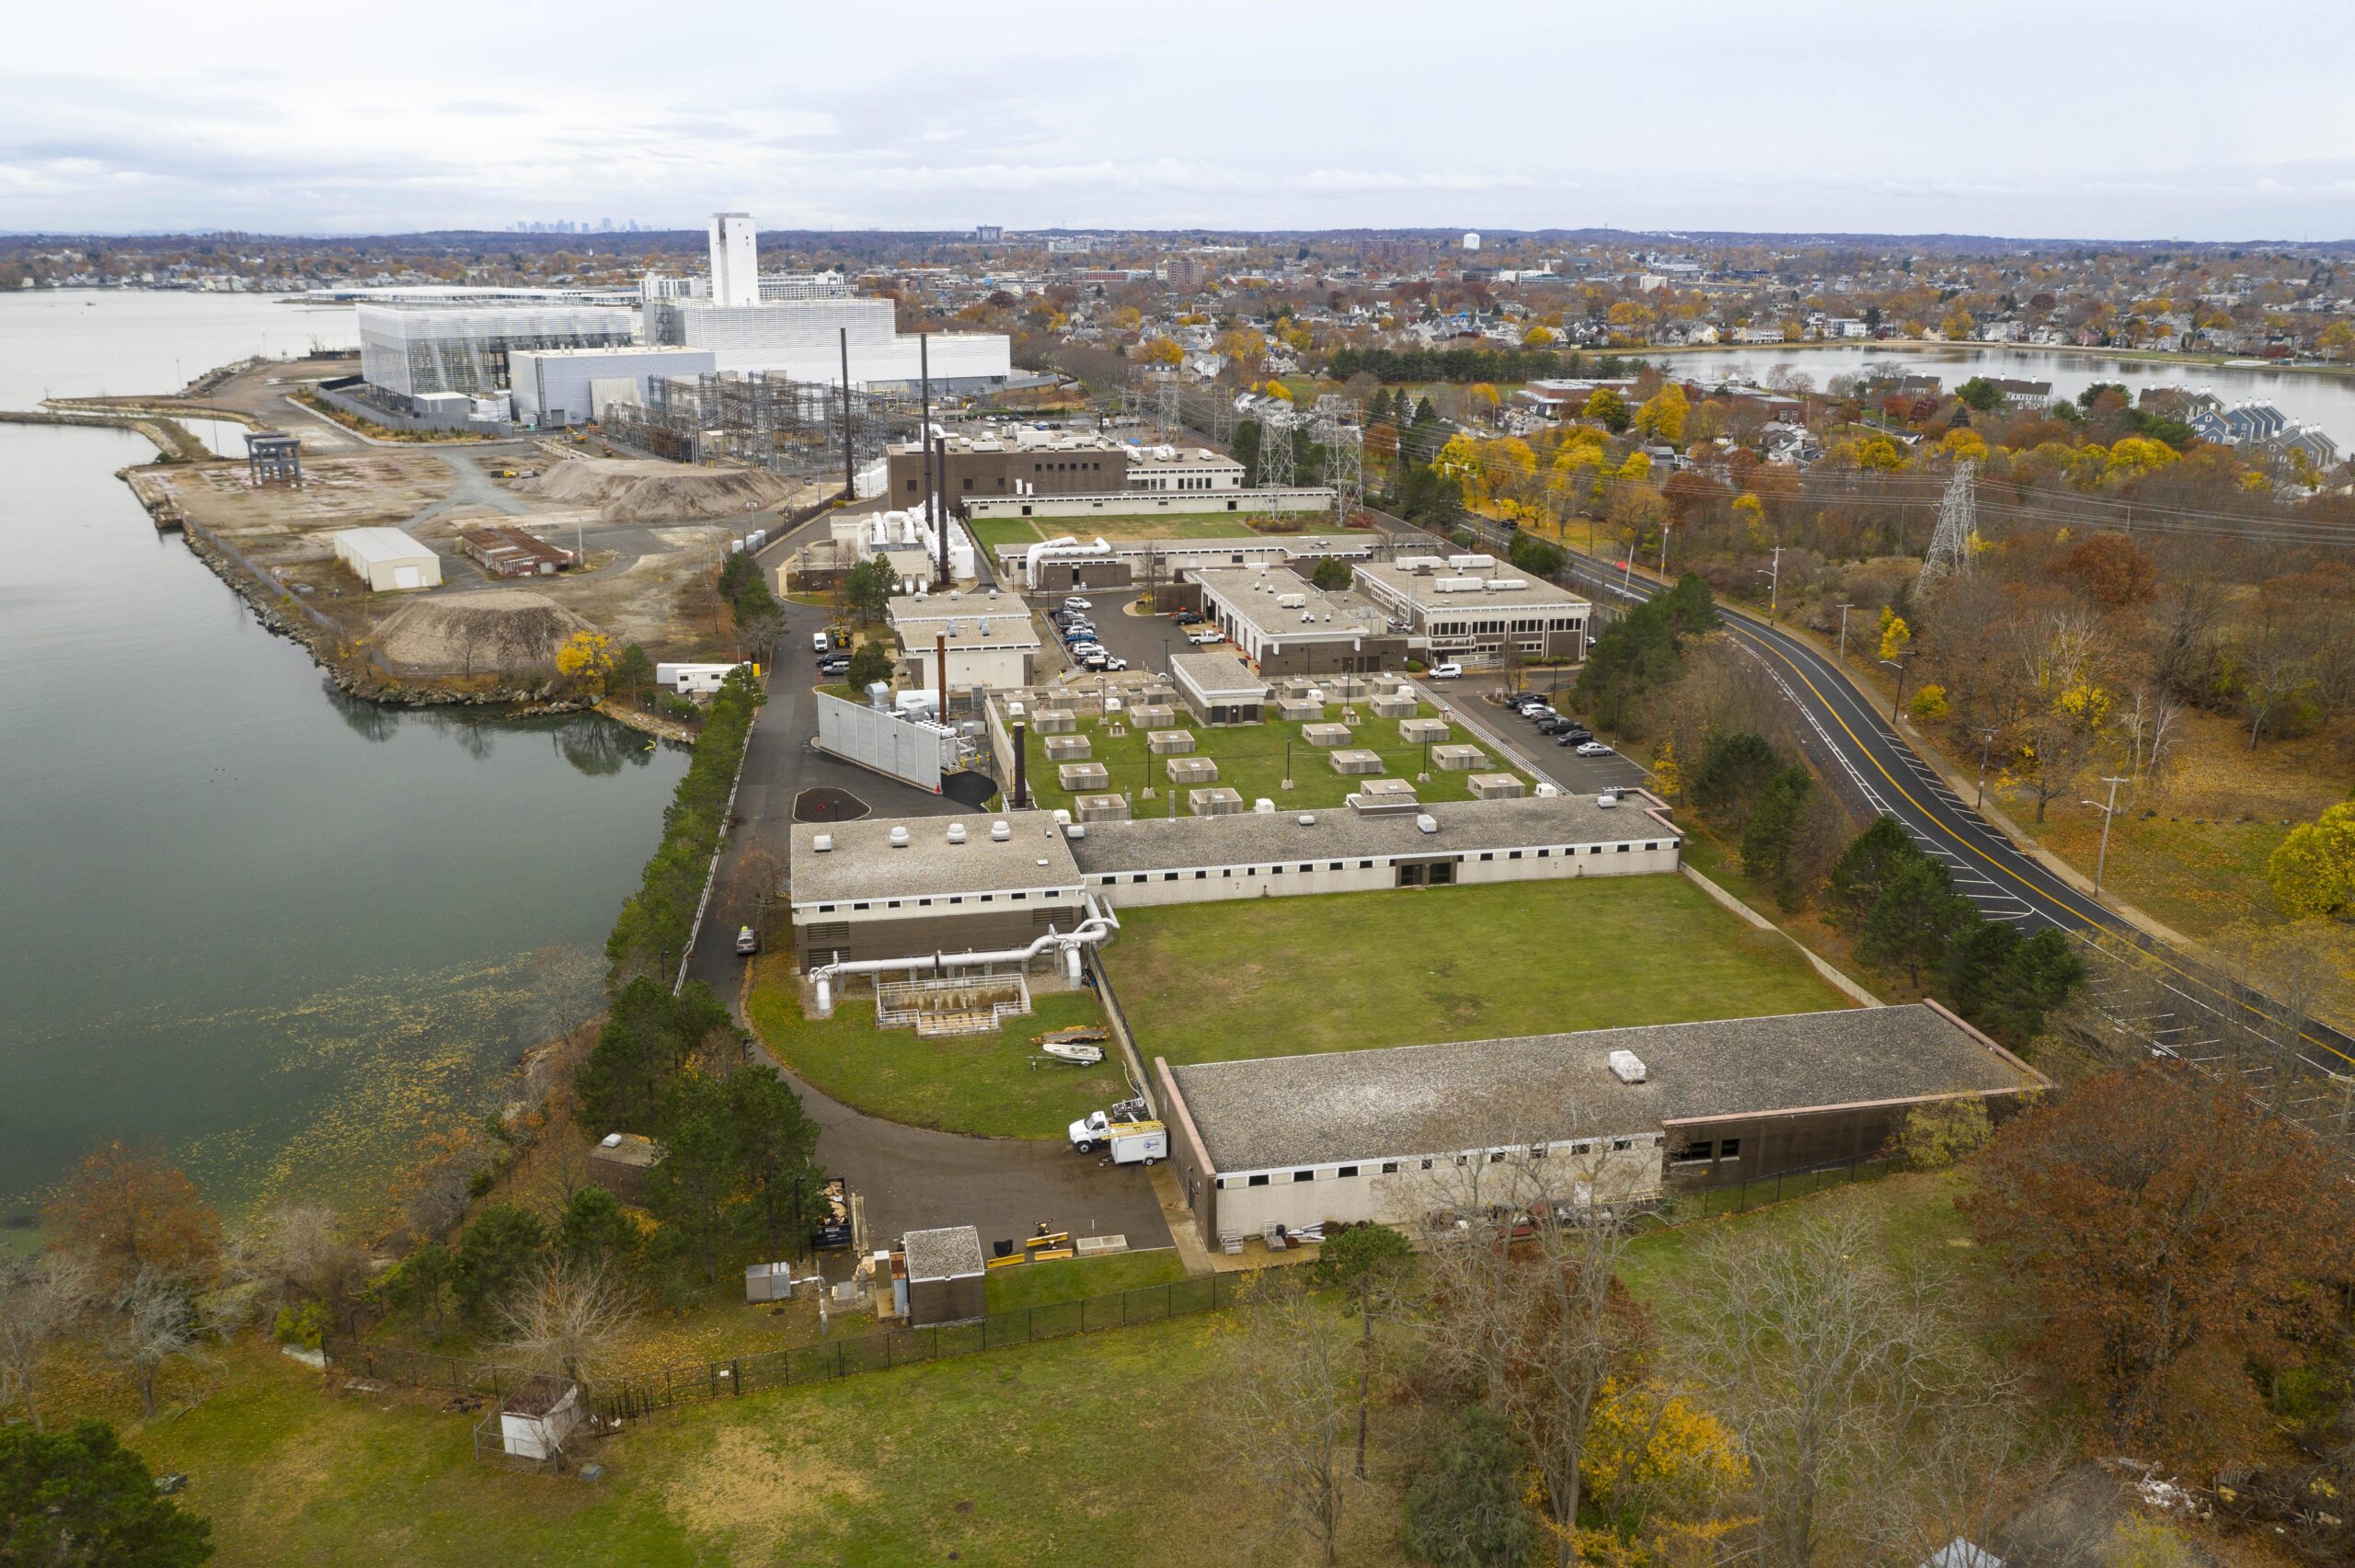 This is an aerial view of the water treatment plant.